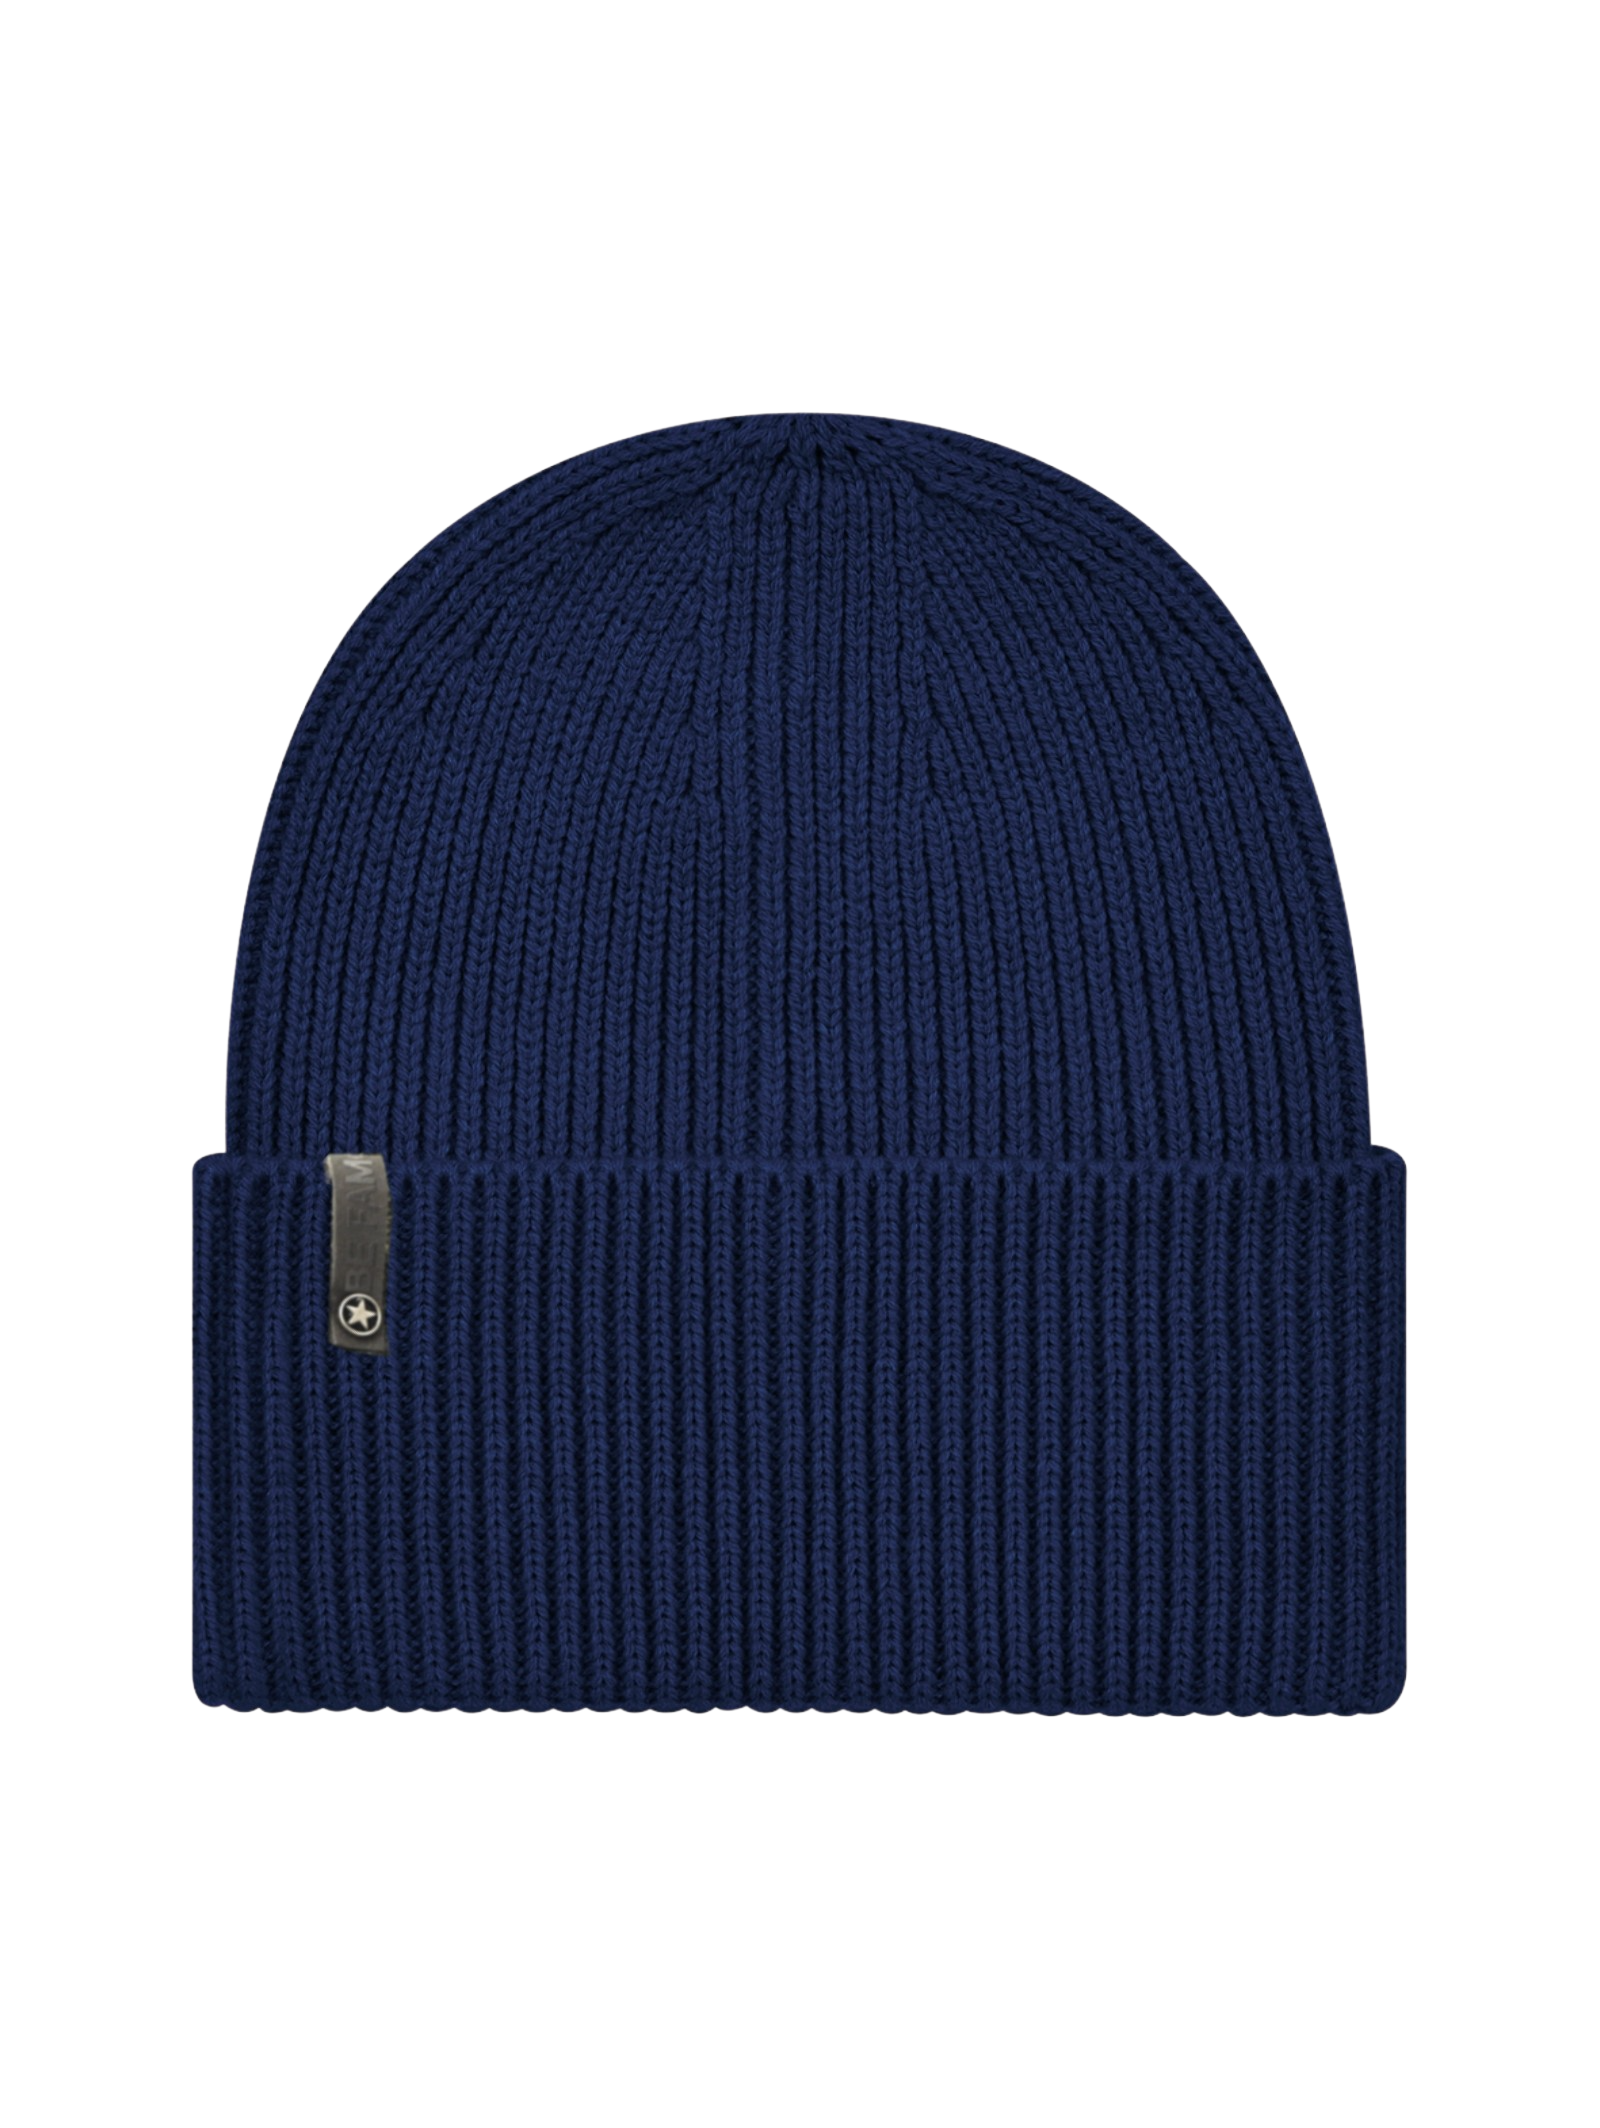 Be Famous Oversized Cuffed Beanie B2101 oxford navy